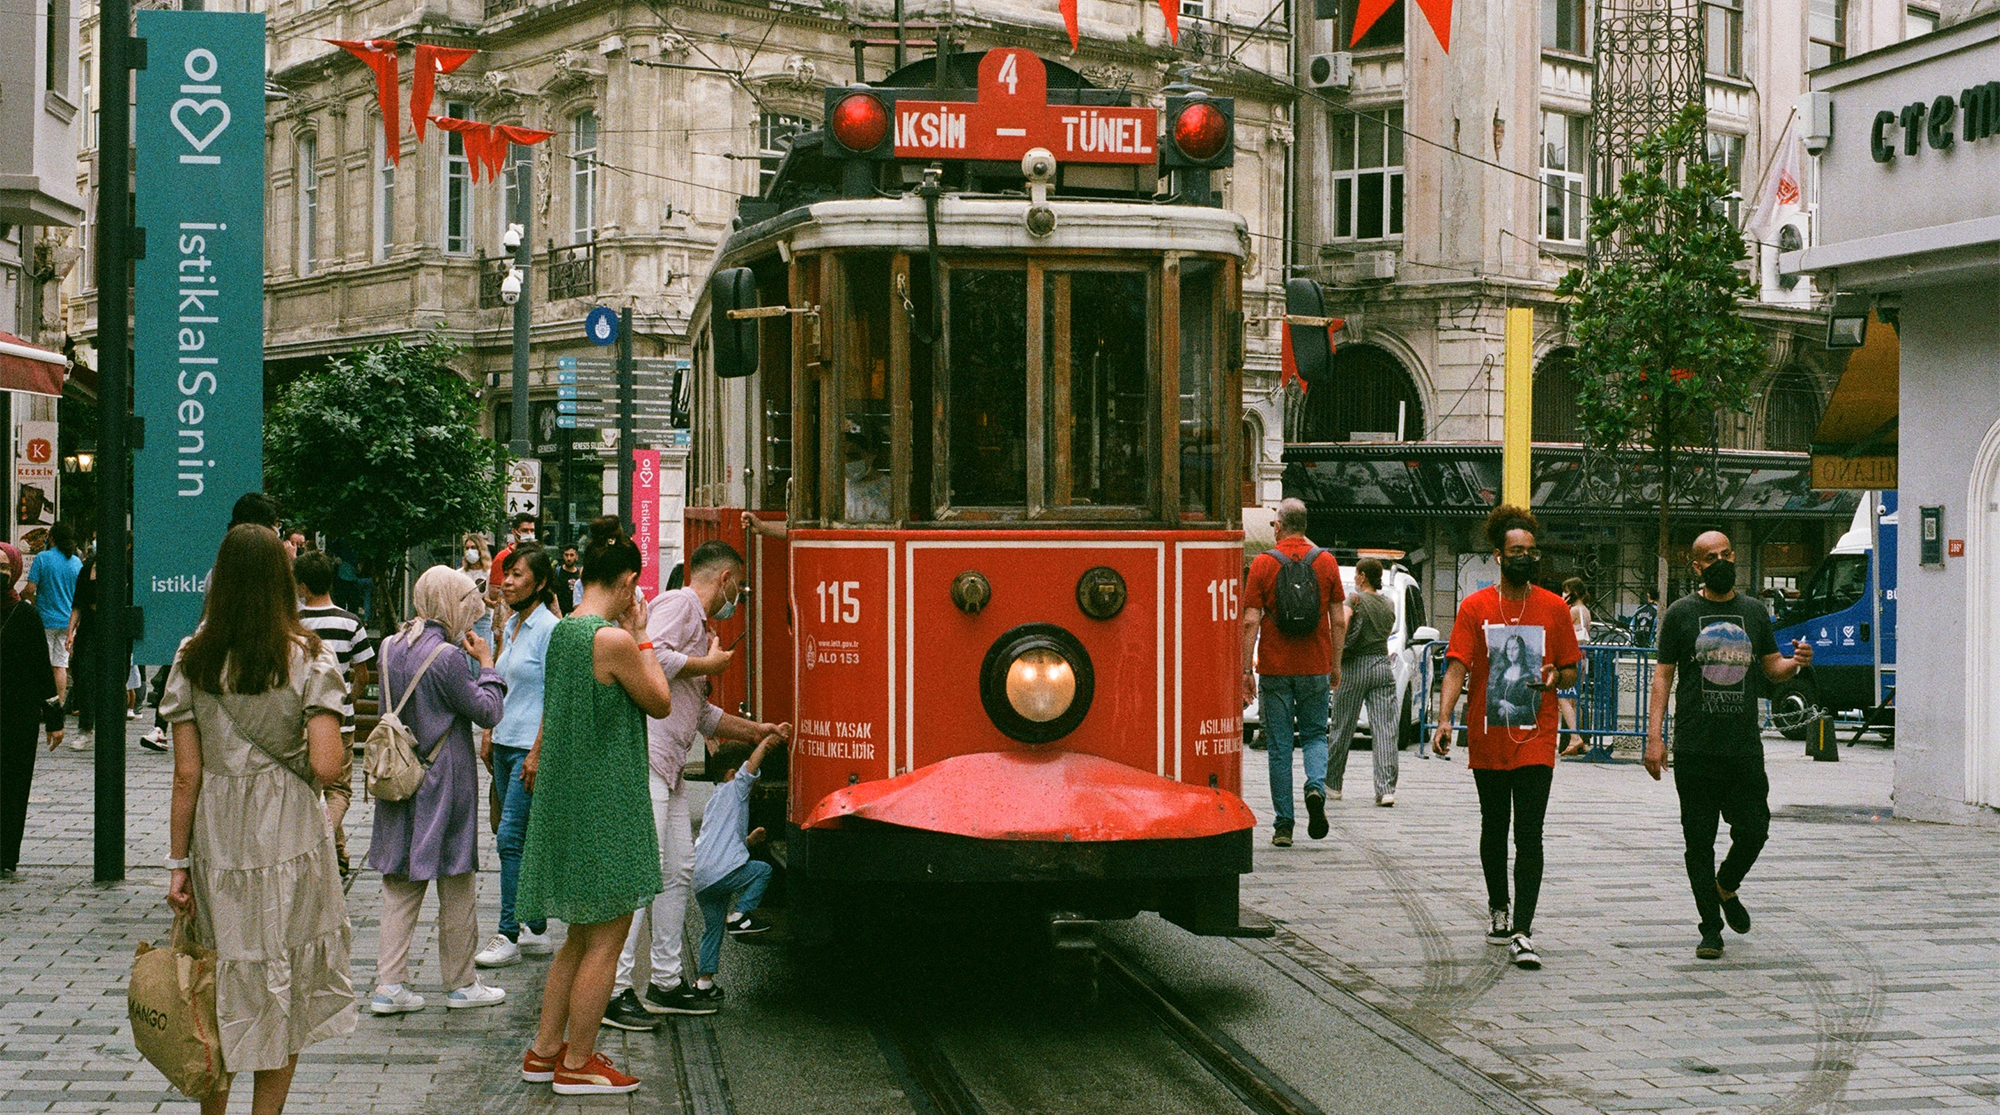 A tram on the street